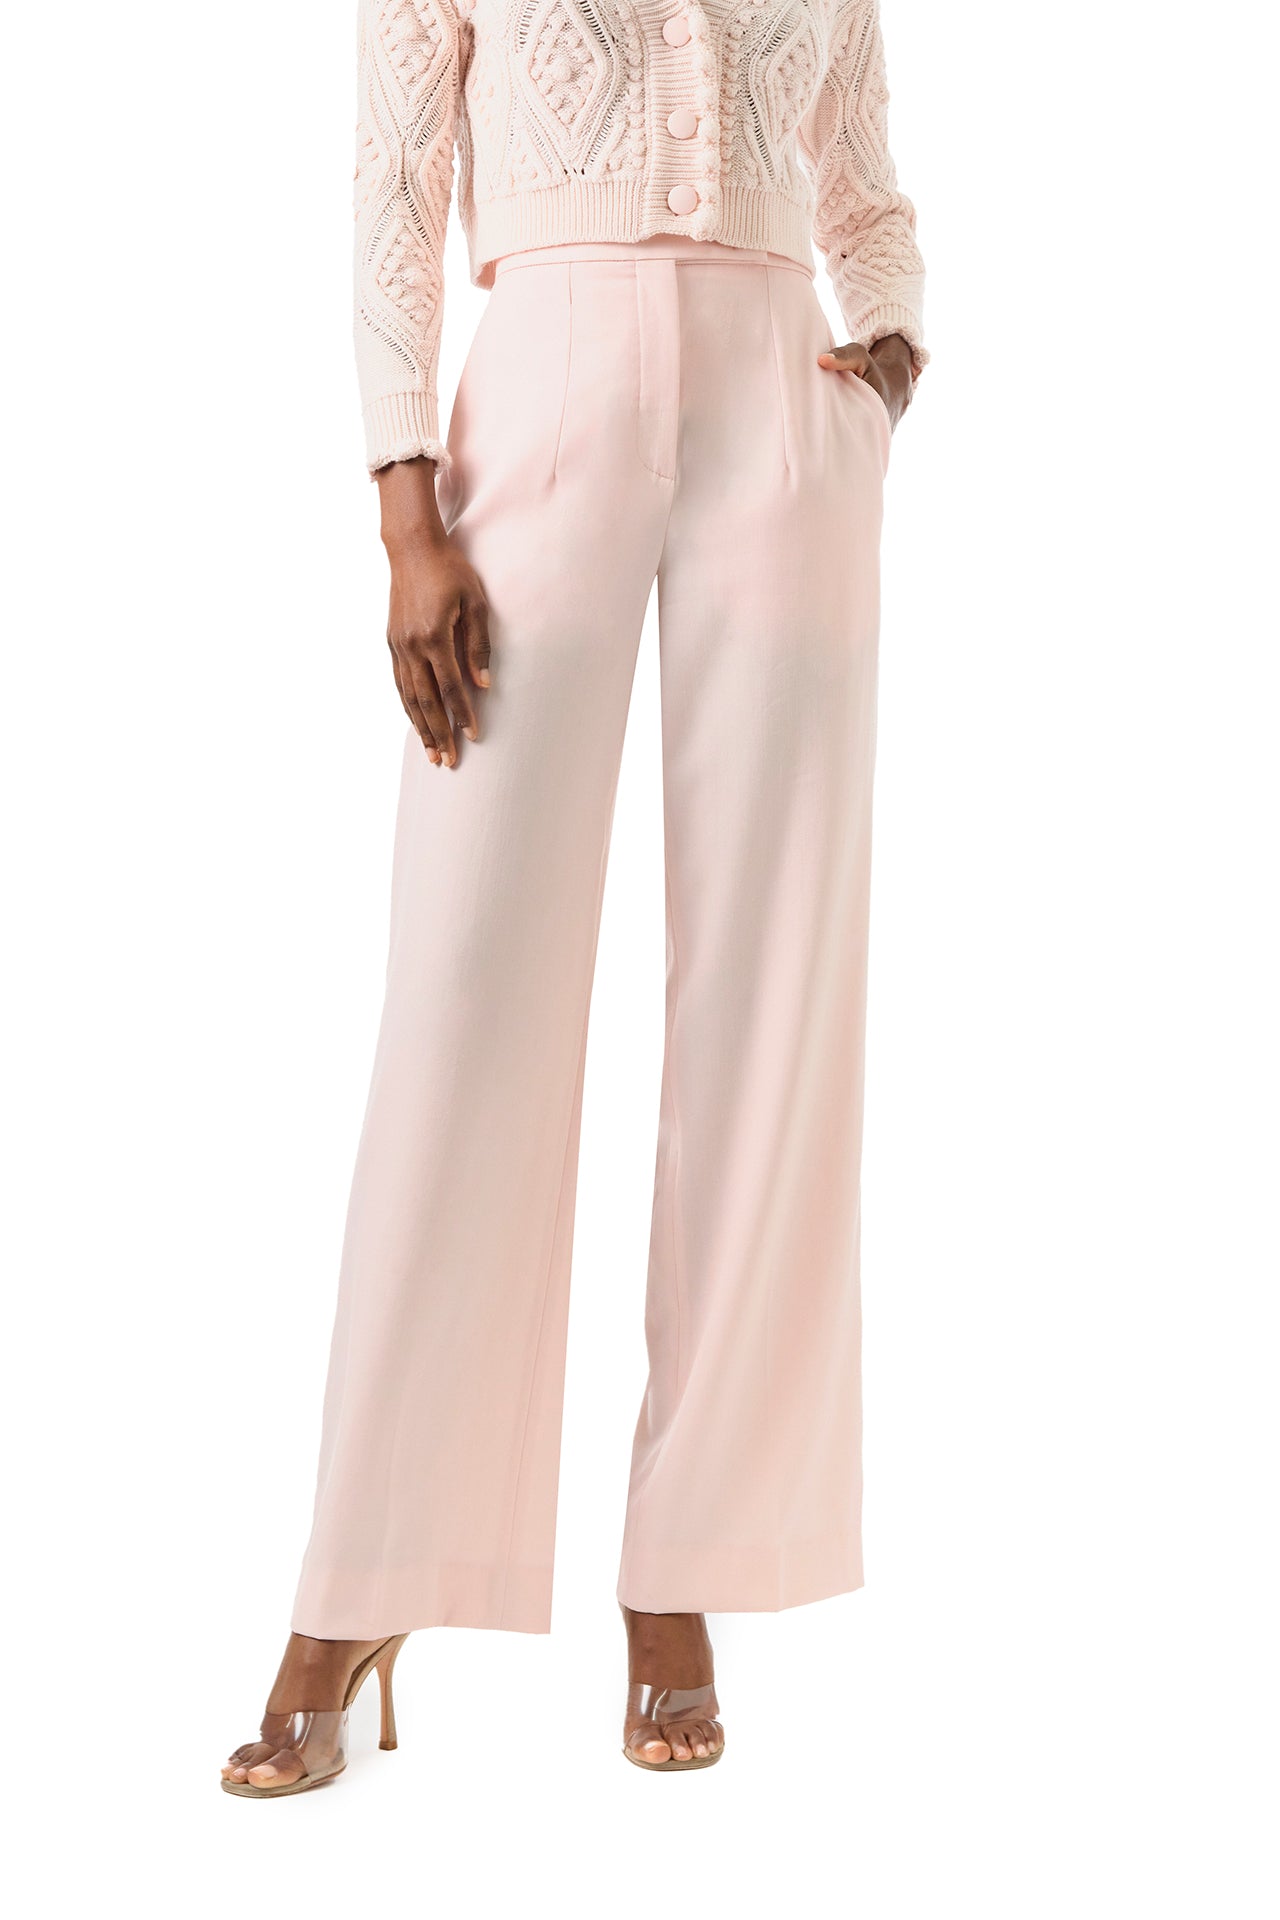 Monique Lhuillier Fall 2024 pale blush wool, straight leg trouser with pockets - front crop.